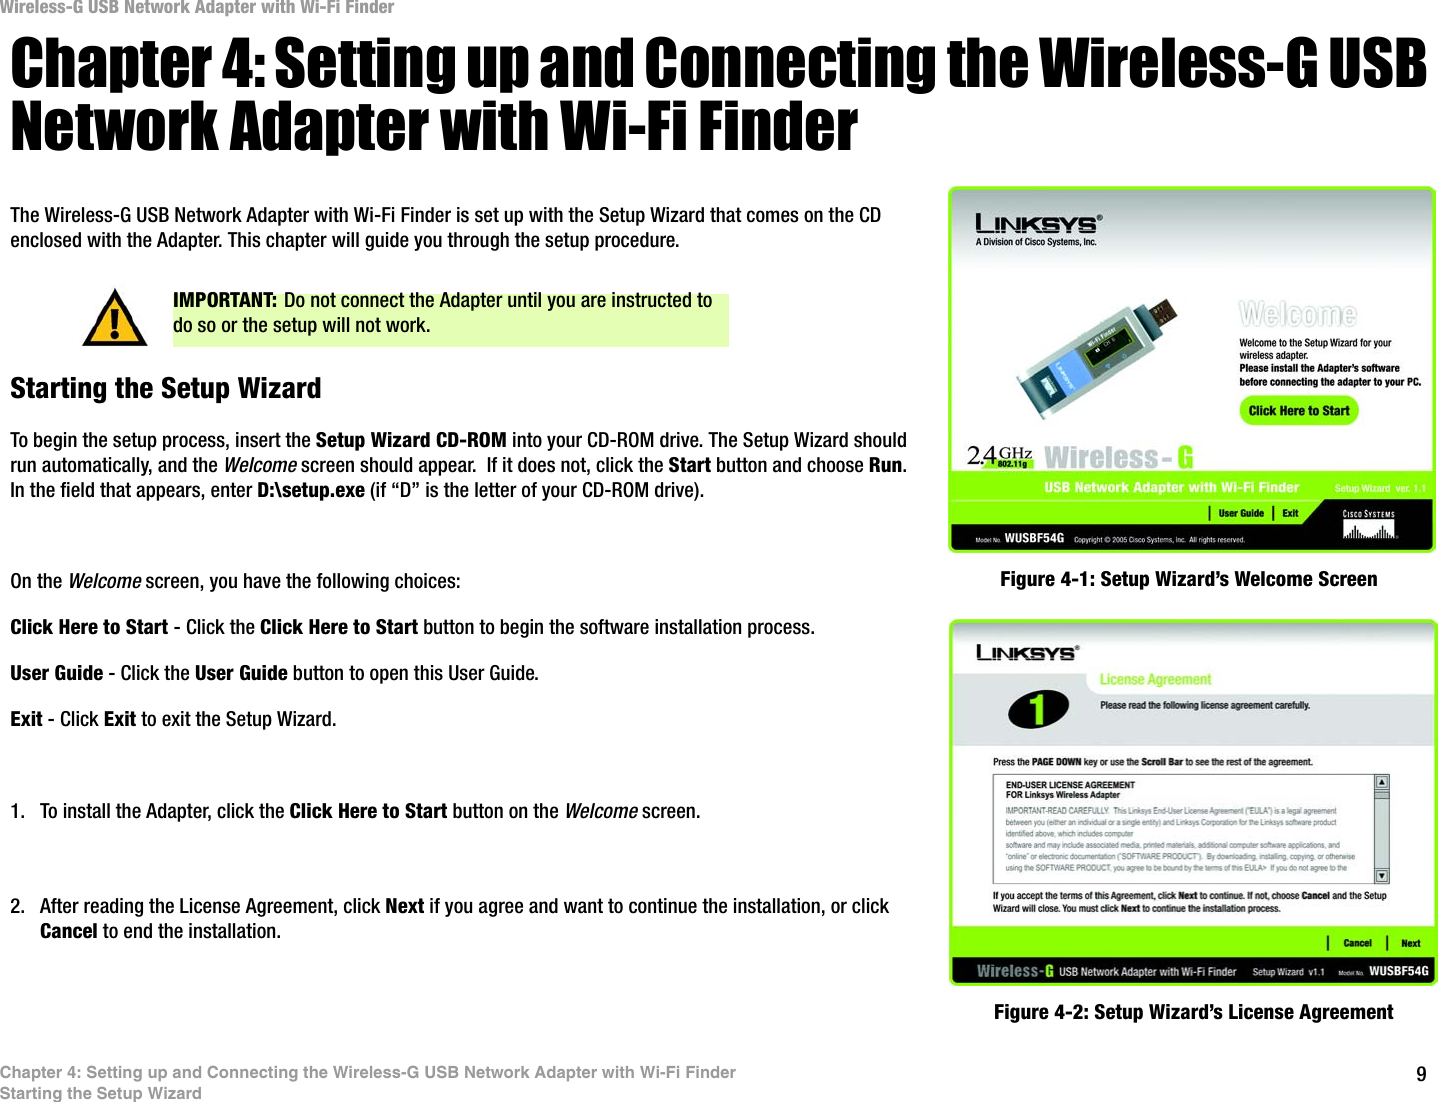 9Chapter 4: Setting up and Connecting the Wireless-G USB Network Adapter with Wi-Fi FinderStarting the Setup WizardWireless-G USB Network Adapter with Wi-Fi FinderChapter 4: Setting up and Connecting the Wireless-G USB Network Adapter with Wi-Fi FinderThe Wireless-G USB Network Adapter with Wi-Fi Finder is set up with the Setup Wizard that comes on the CD enclosed with the Adapter. This chapter will guide you through the setup procedure. Starting the Setup WizardTo begin the setup process, insert the Setup Wizard CD-ROM into your CD-ROM drive. The Setup Wizard should run automatically, and the Welcome screen should appear.  If it does not, click the Start button and choose Run. In the field that appears, enter D:\setup.exe (if “D” is the letter of your CD-ROM drive). On the Welcome screen, you have the following choices:Click Here to Start - Click the Click Here to Start button to begin the software installation process. User Guide - Click the User Guide button to open this User Guide. Exit - Click Exit to exit the Setup Wizard.1. To install the Adapter, click the Click Here to Start button on the Welcome screen.2. After reading the License Agreement, click Next if you agree and want to continue the installation, or click Cancel to end the installation.Figure 4-1: Setup Wizard’s Welcome ScreenFigure 4-2: Setup Wizard’s License AgreementIMPORTANT: Do not connect the Adapter until you are instructed to do so or the setup will not work.